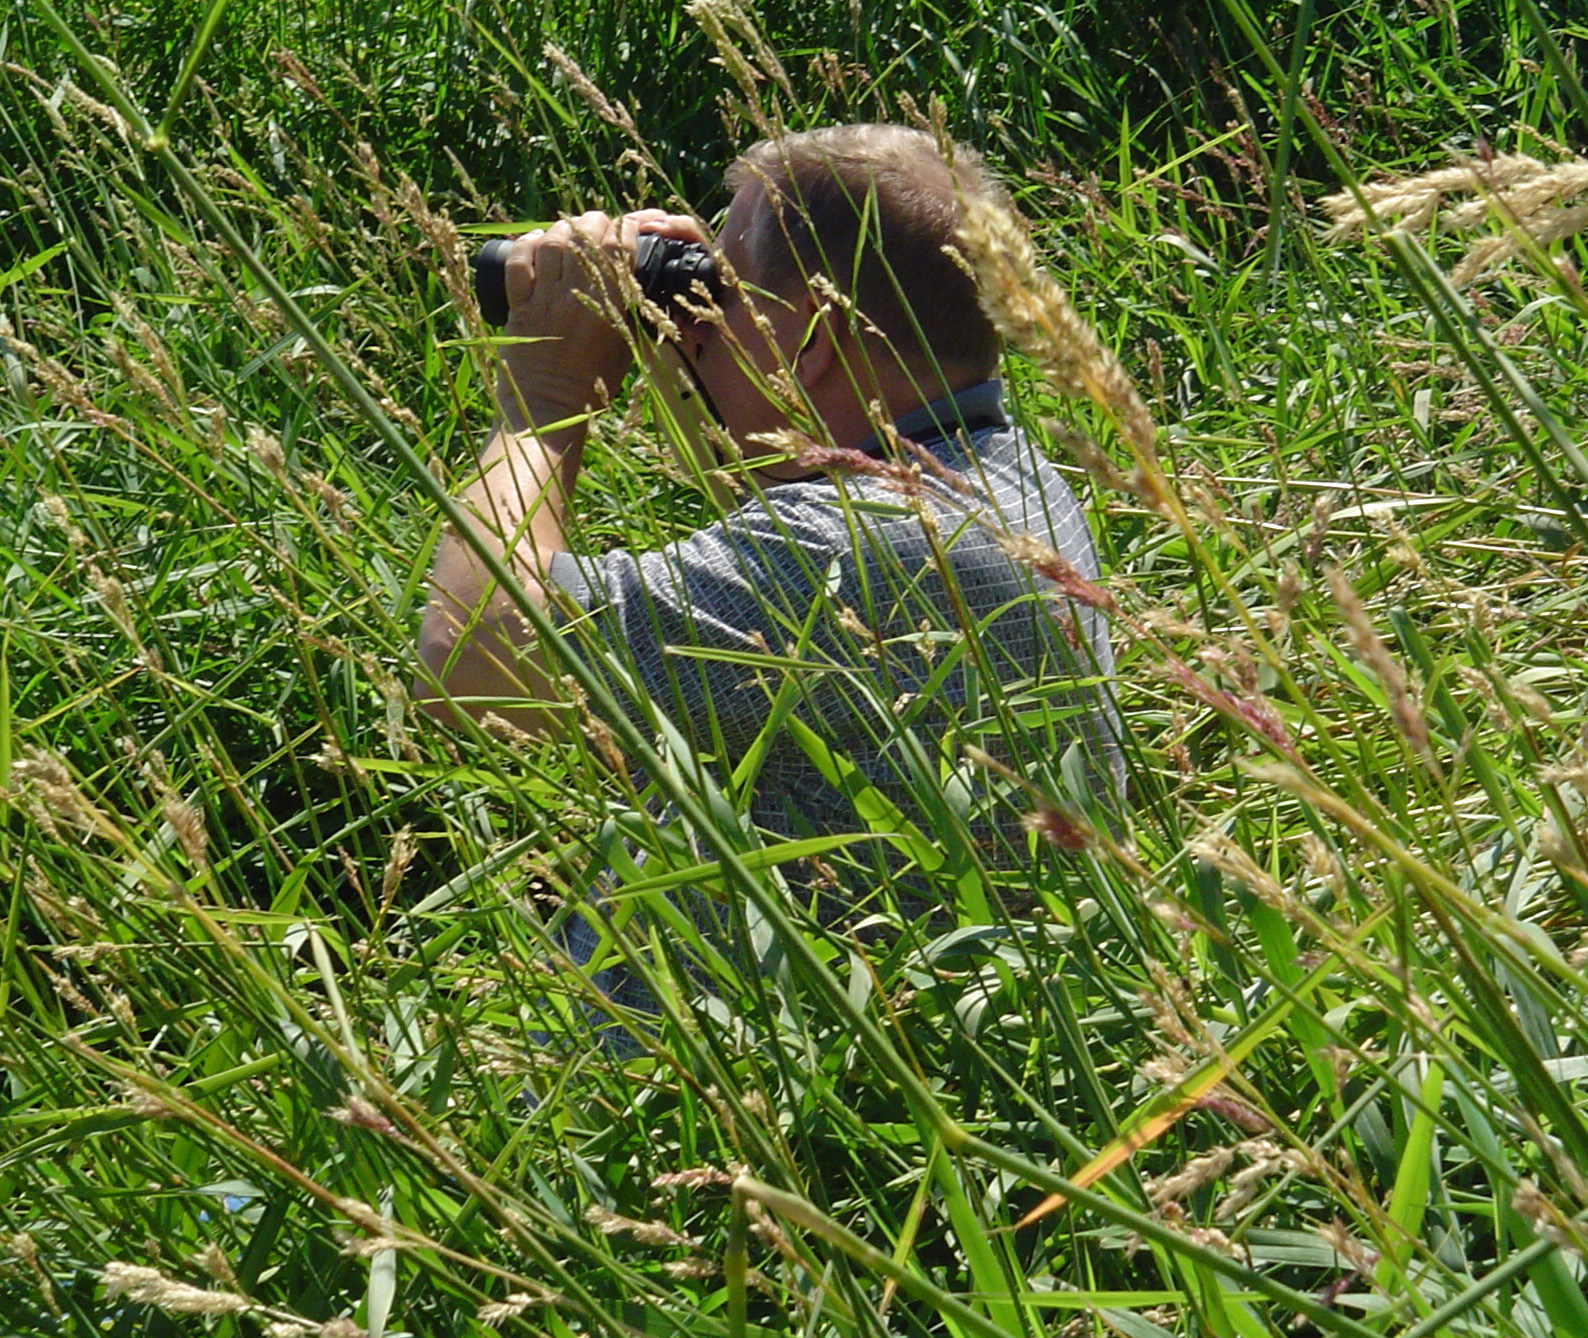 a person in the grass taking pictures with their camera